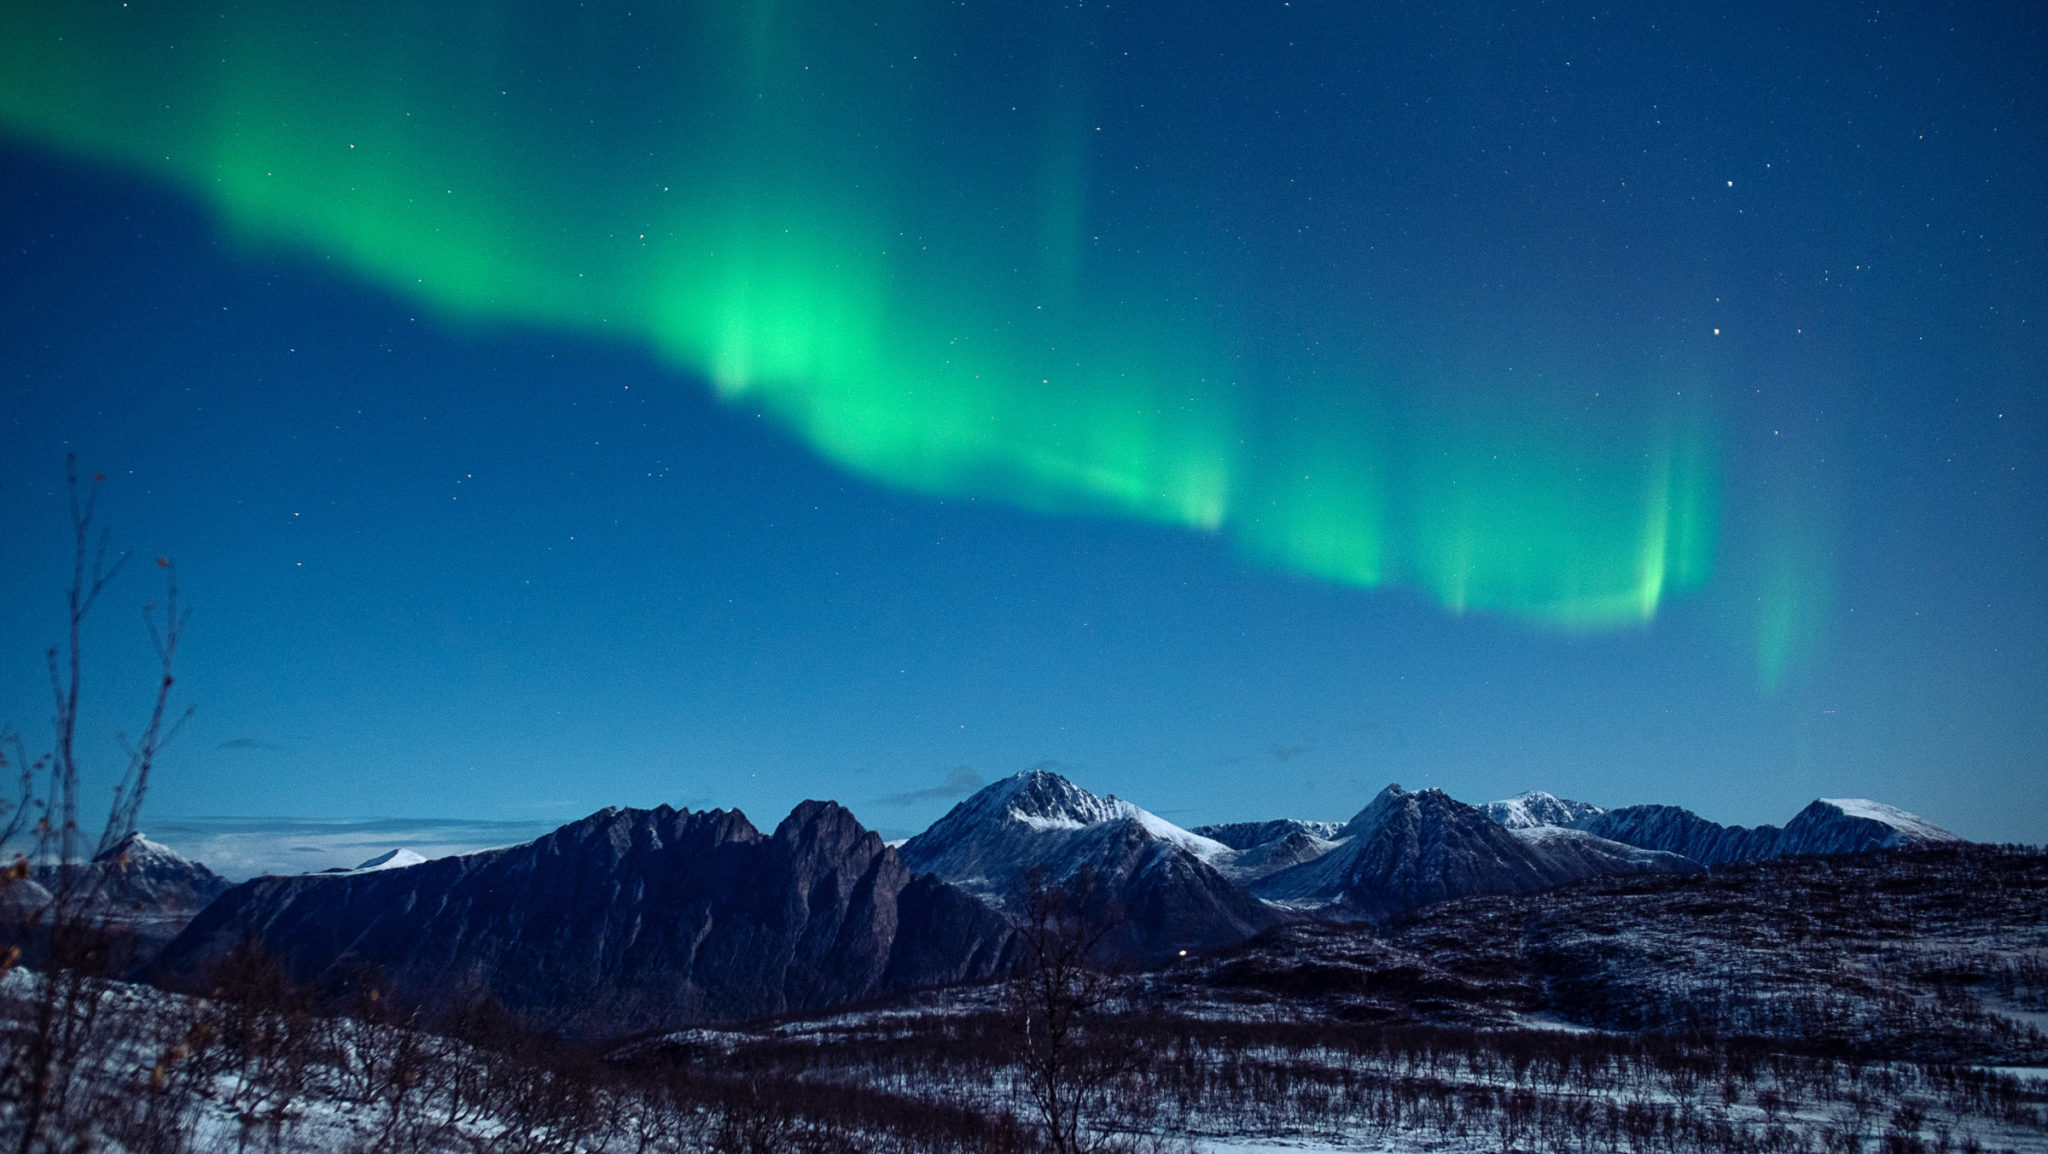 Northern Lights from Mount Keipen, or Aunfjellet, with the peaks of the Grytøya Island right under © Jan Schmitt